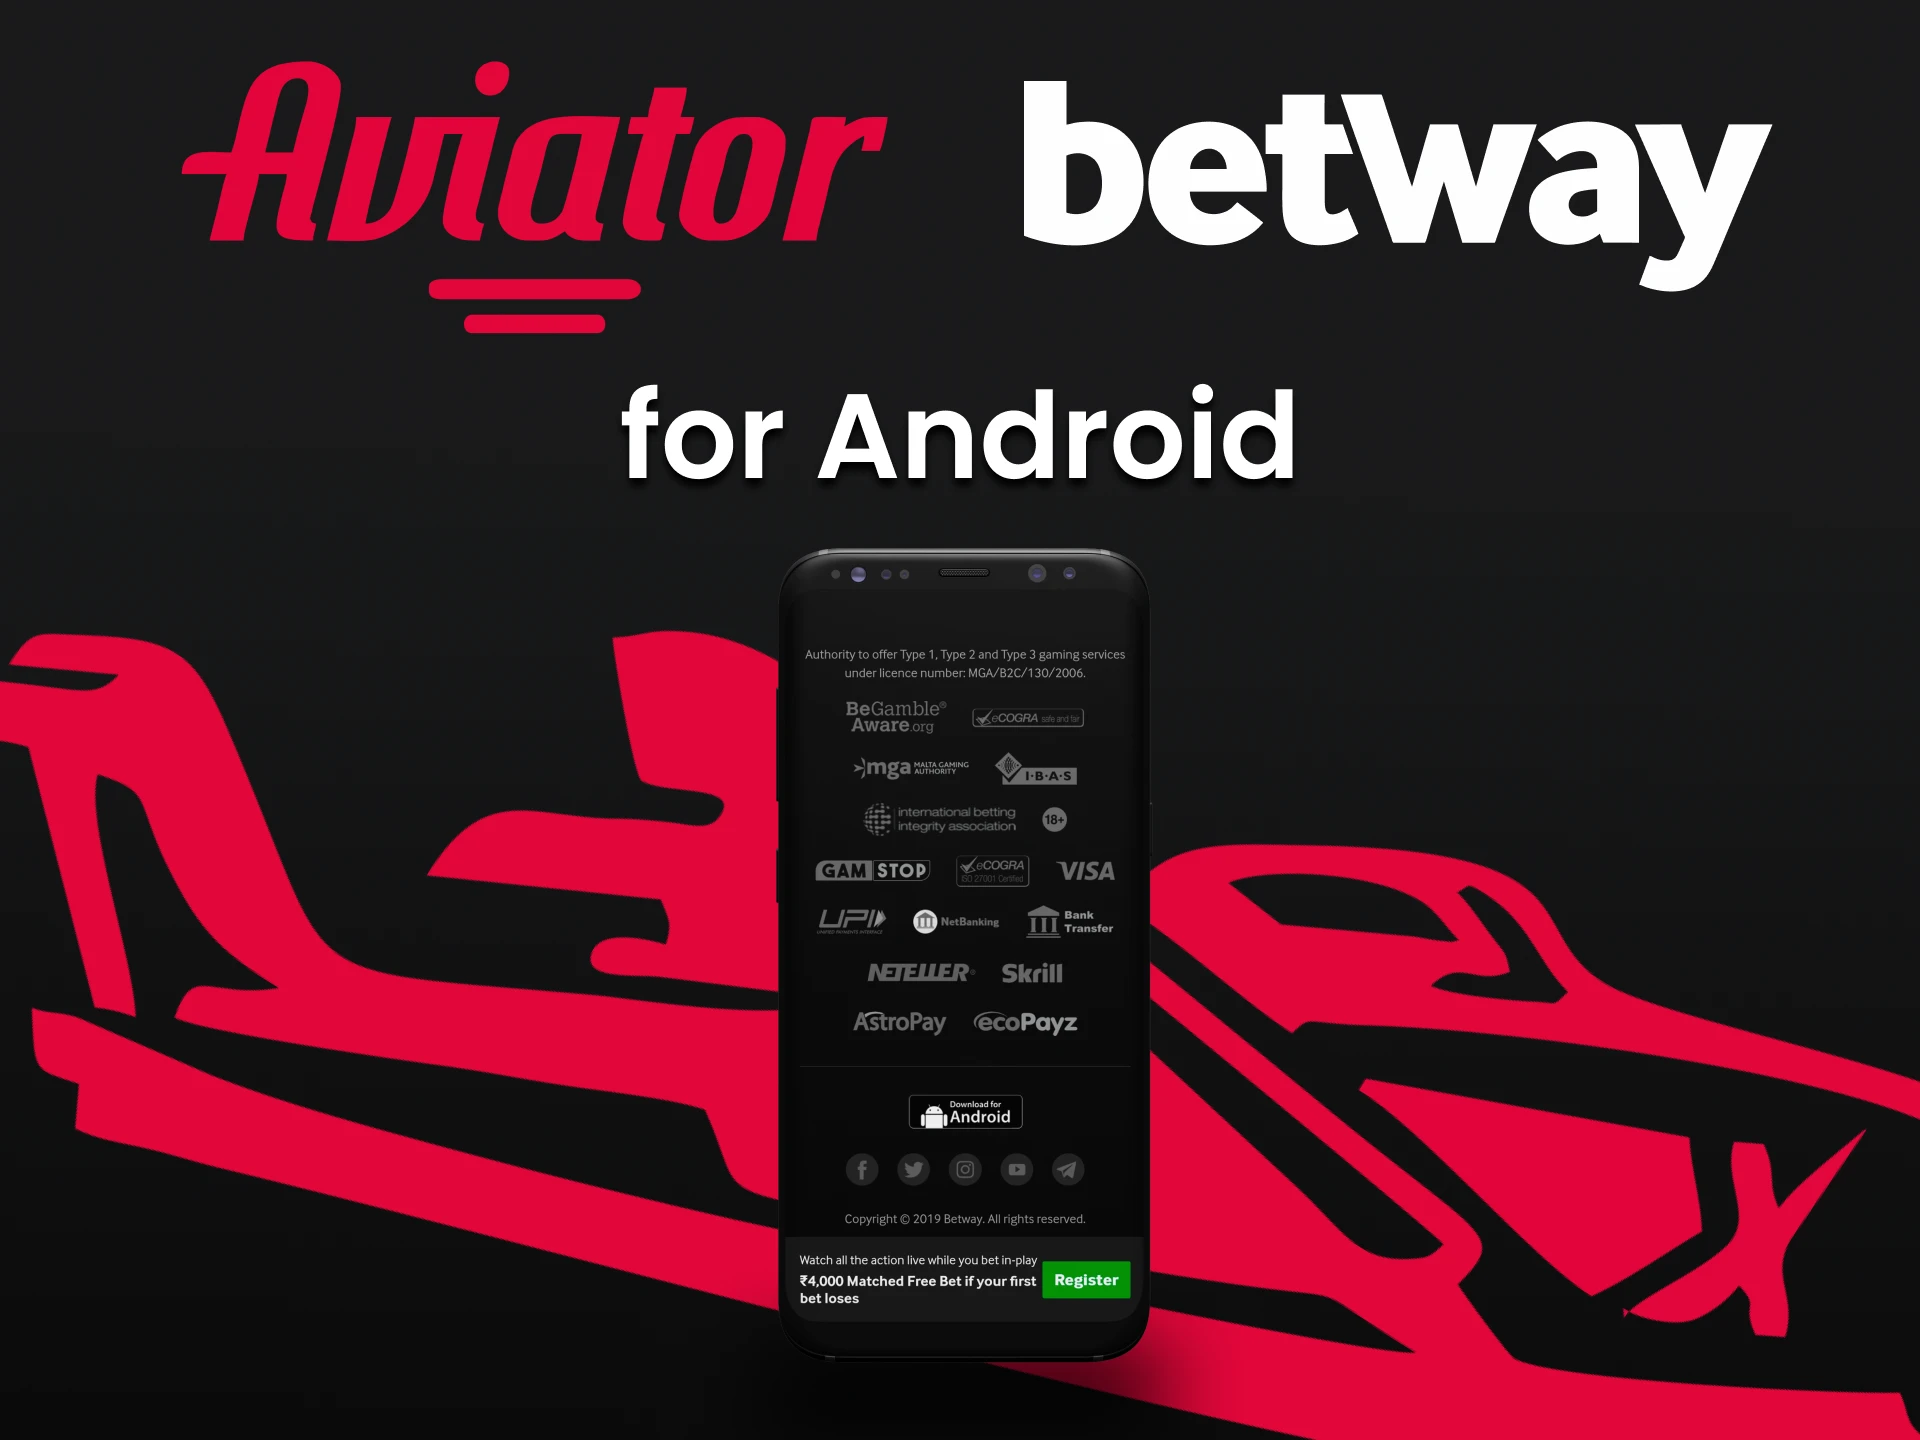 Download the app for android from Betway.